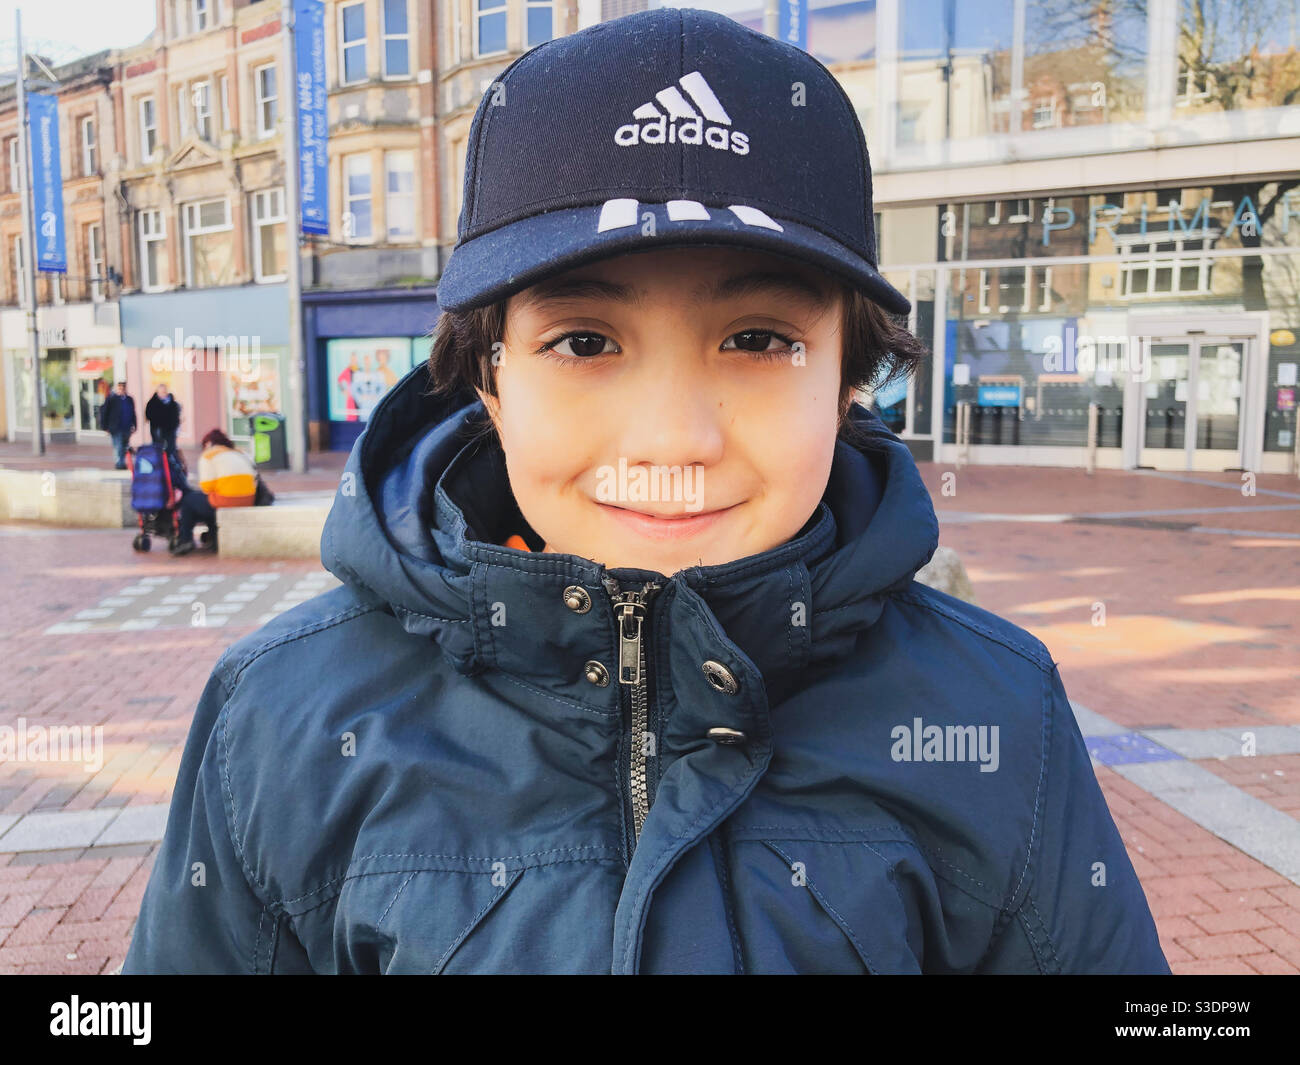 Portrait of a young boy wearing a coat and baseball cap Stock Photo - Alamy